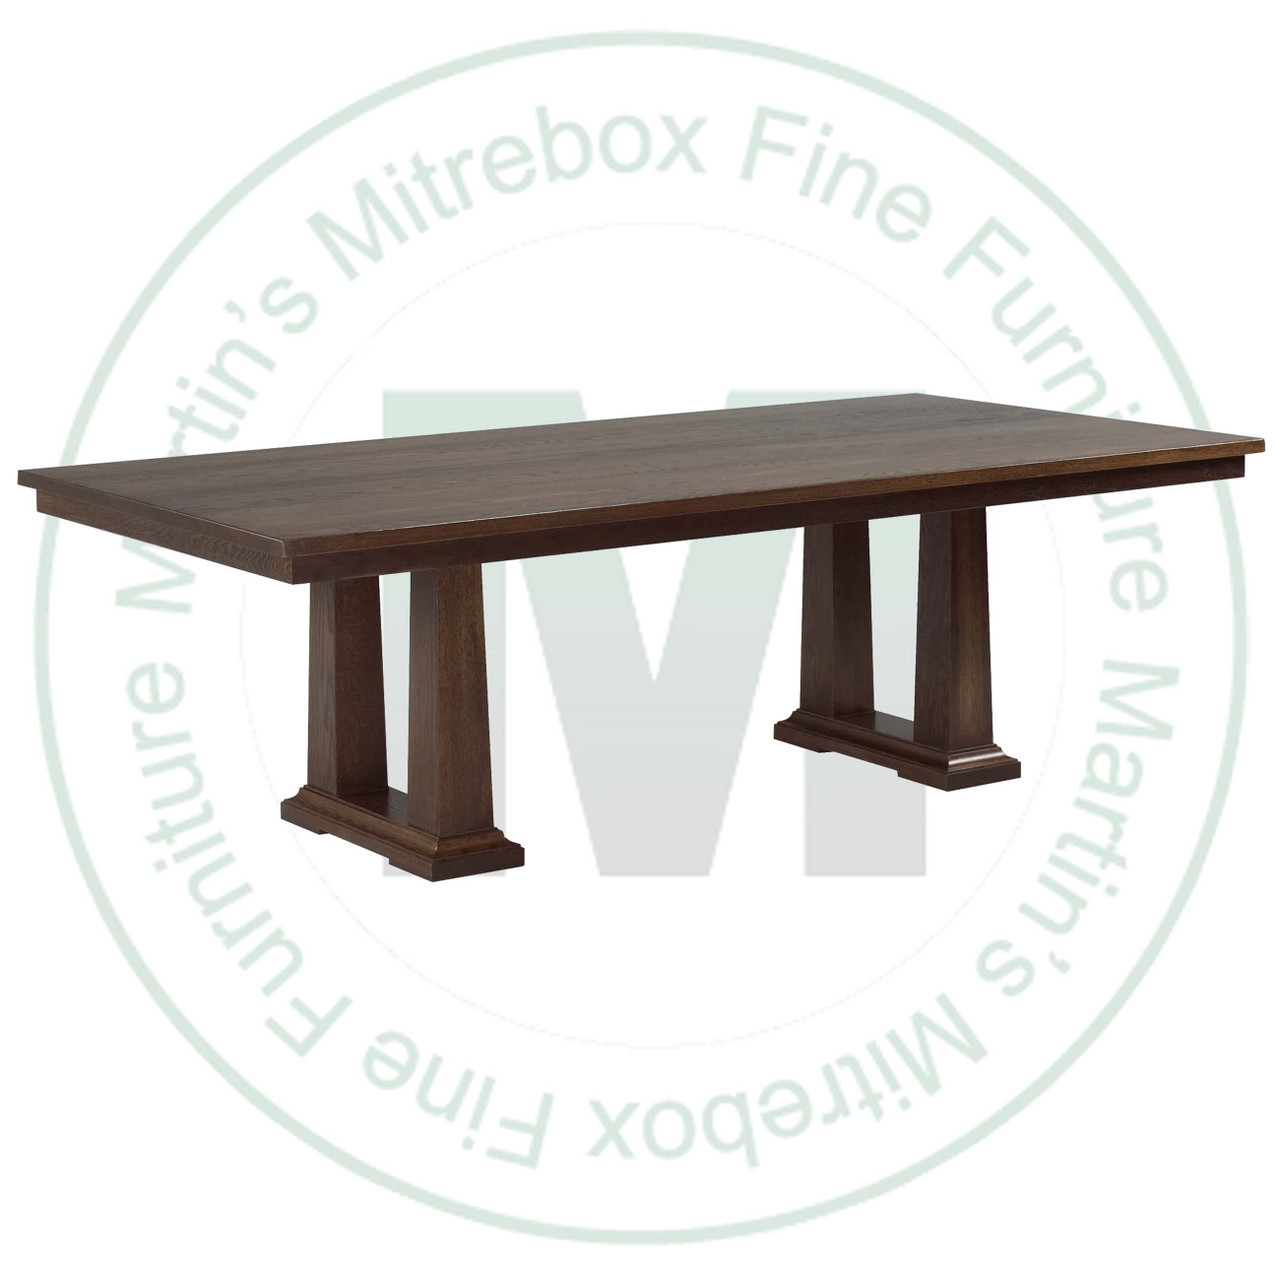 Wormy Maple Acropolis Solid Top Double Pedestal Table 48''D x 120''W x 30''H Table Has 1.25'' Thick Top With 16'' Extensions.